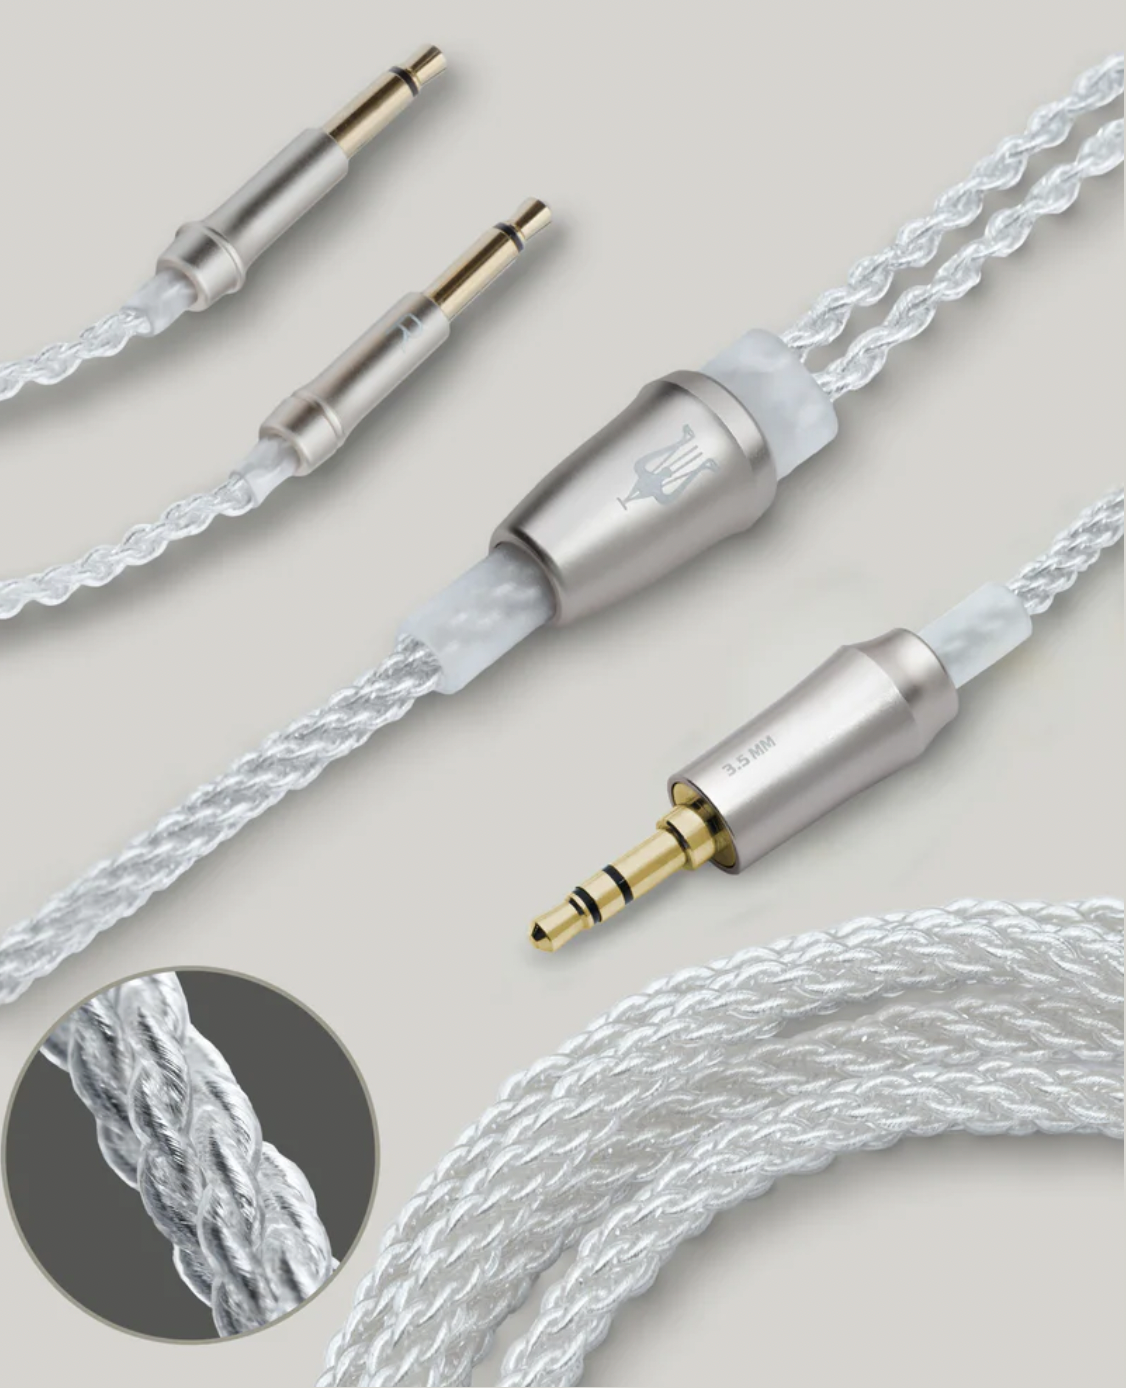 Meze 99 Series Silver-Plated Premium Cable